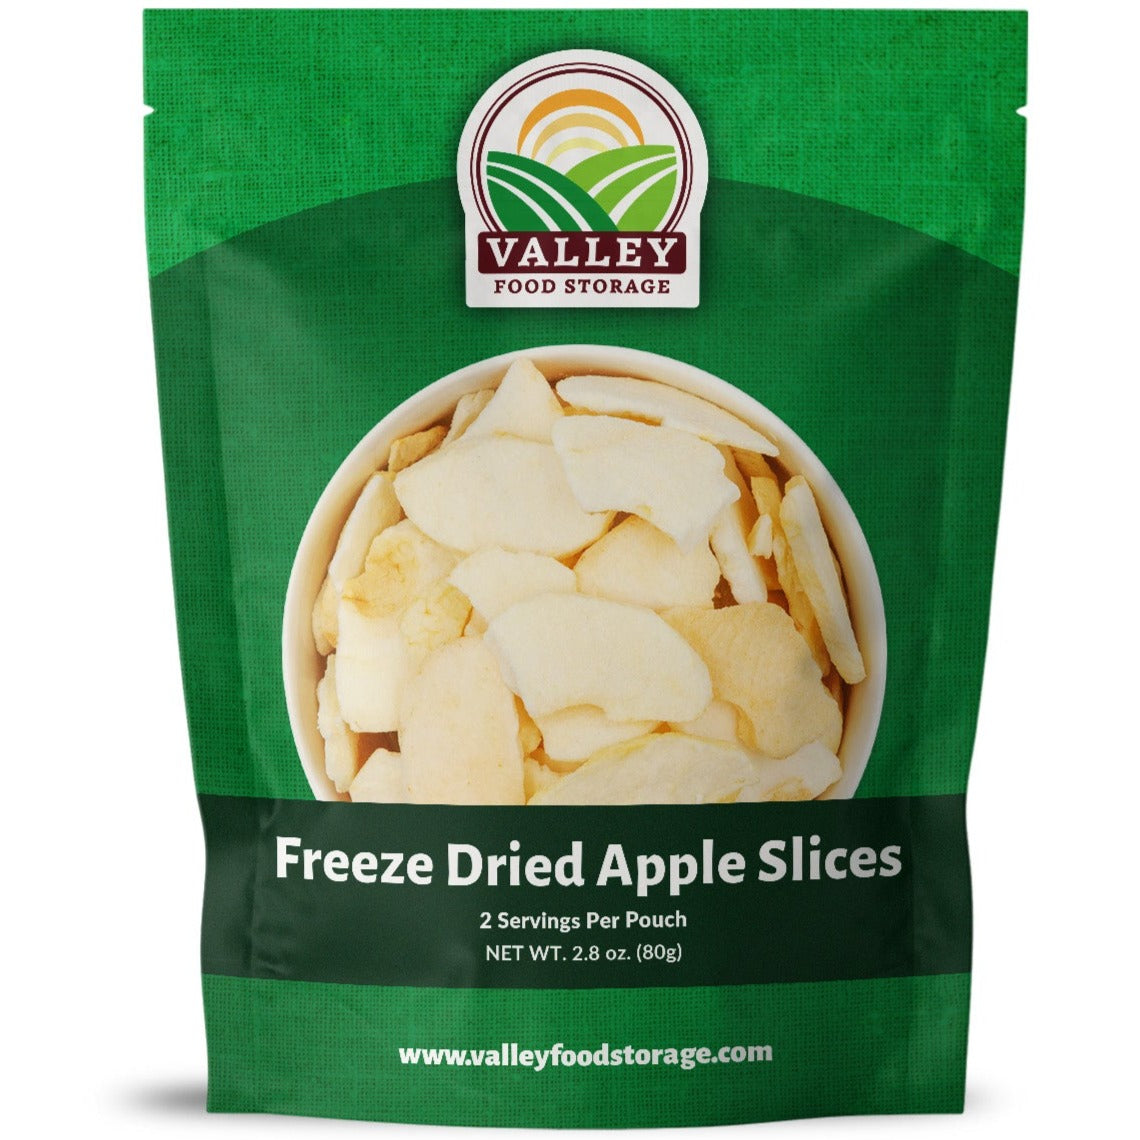 Freeze Dried Apples From Valley Food Storage